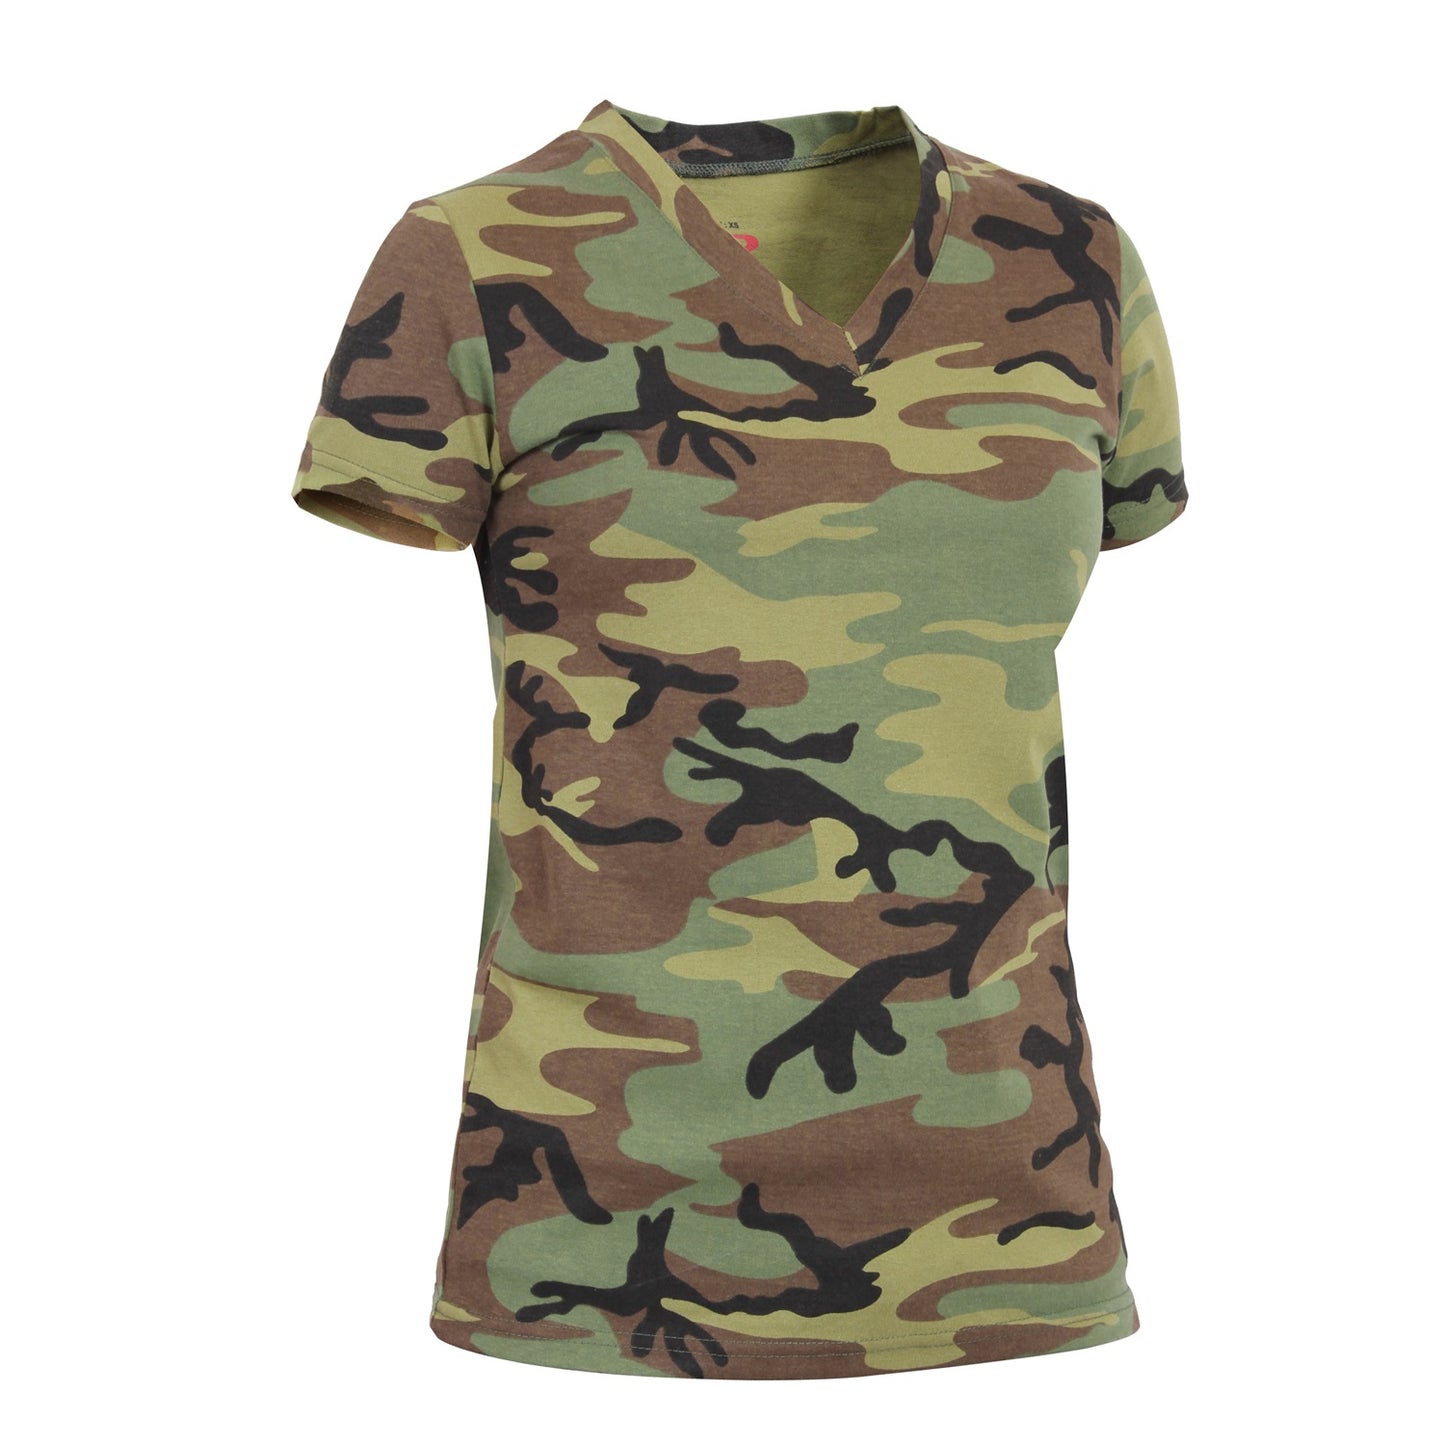 Women's Long Length Camo V-Neck T-Shirt - Rothco Woodland or Pink Camouflage Tee